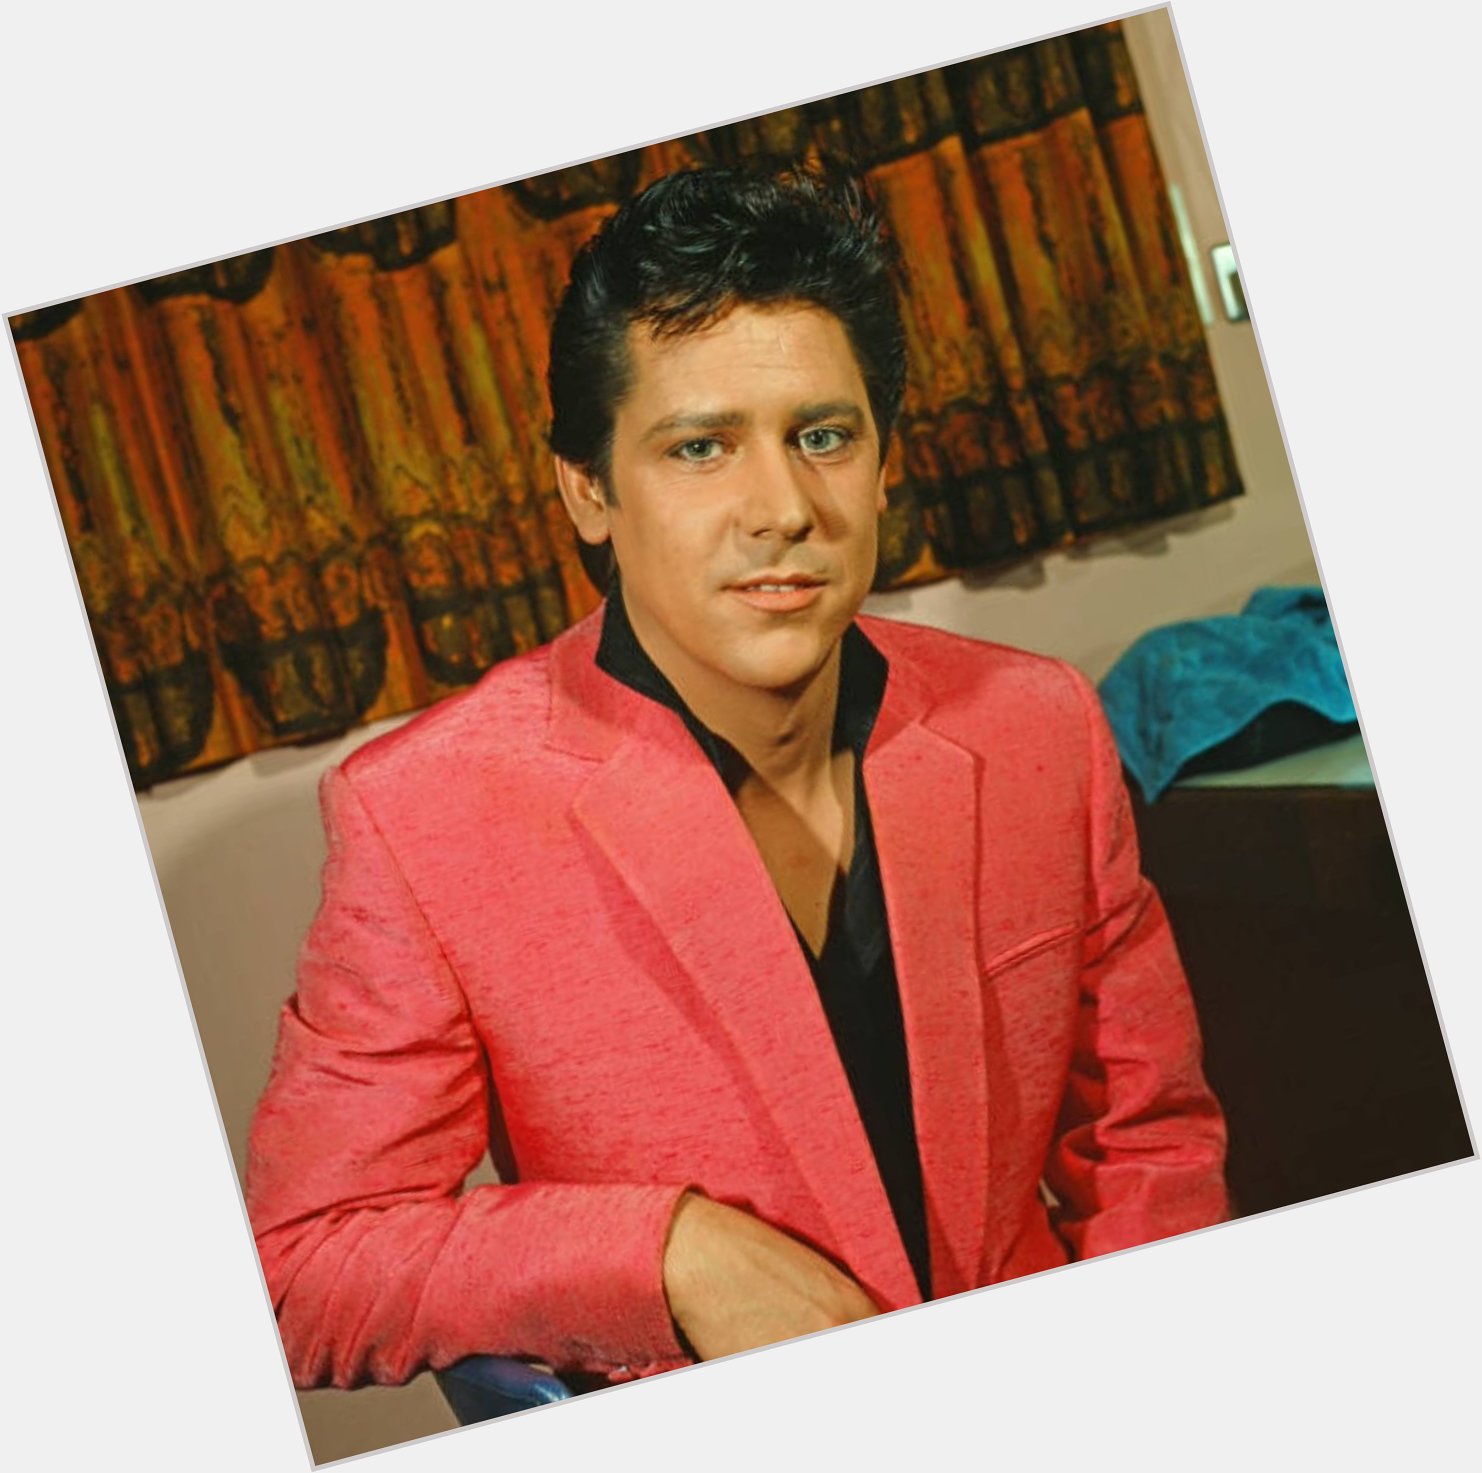 Happy Birthday to Welsh Rock and Roll singer songwriter Shakin\ Stevens, born on this day in Cardiff in 1948.   